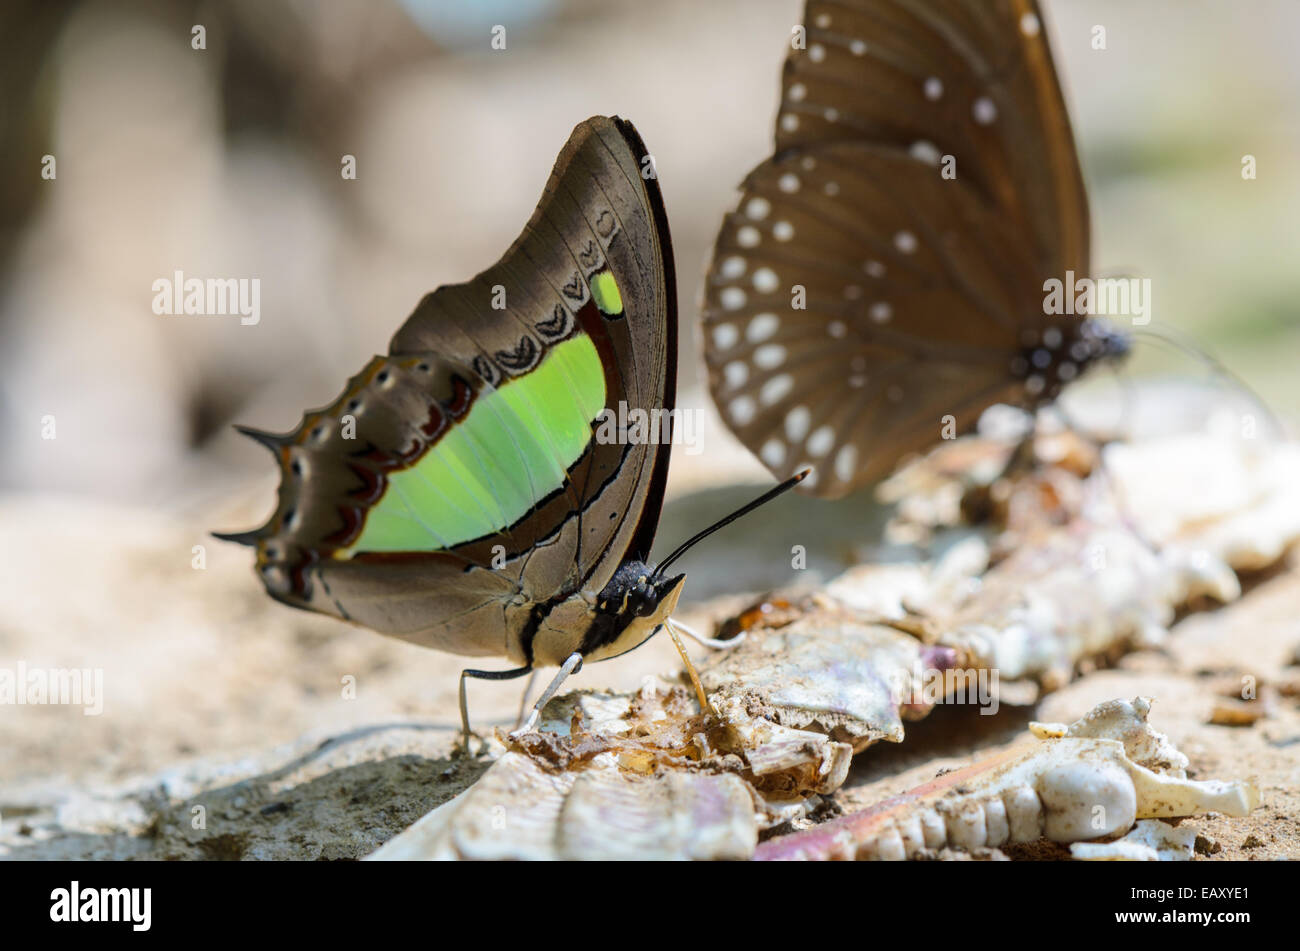 Common Nawab butterfly (Polyura athamas) with green spots on wings feeding on the ground Stock Photo